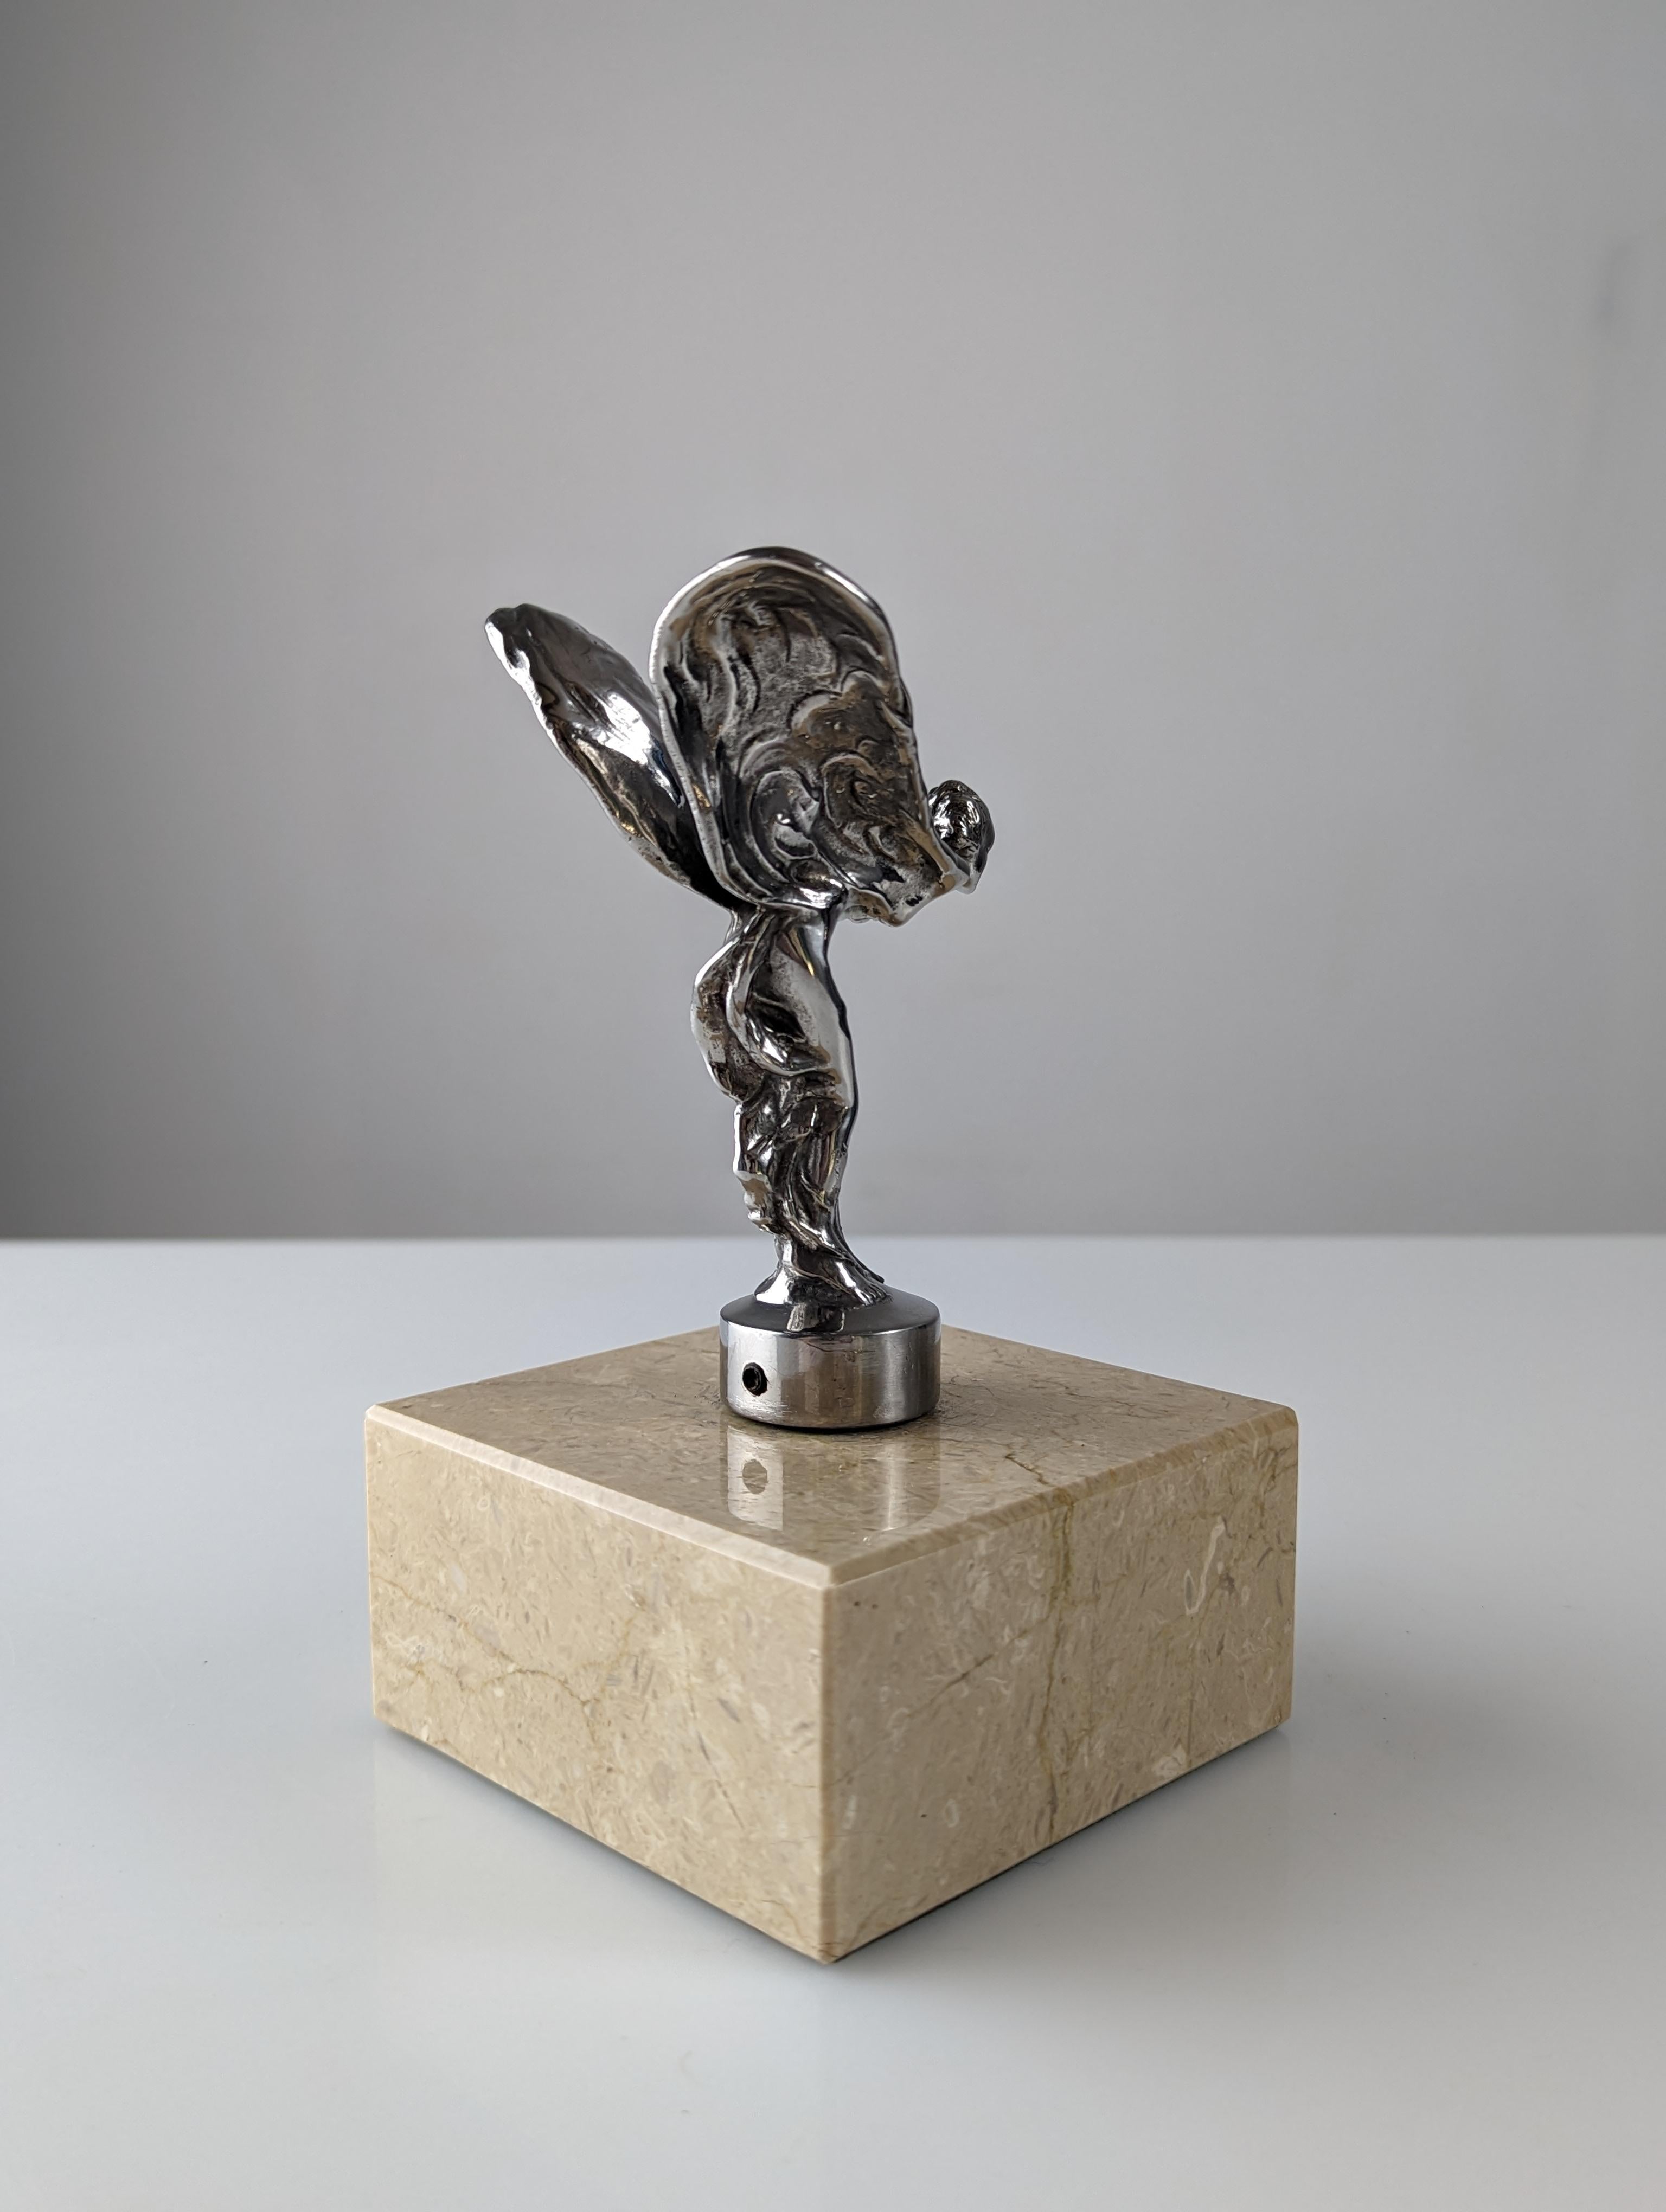 Mid-20th Century Sculpture The Spirit of Ecstasy by Charles Sykes for Rolls-Royce 1960s